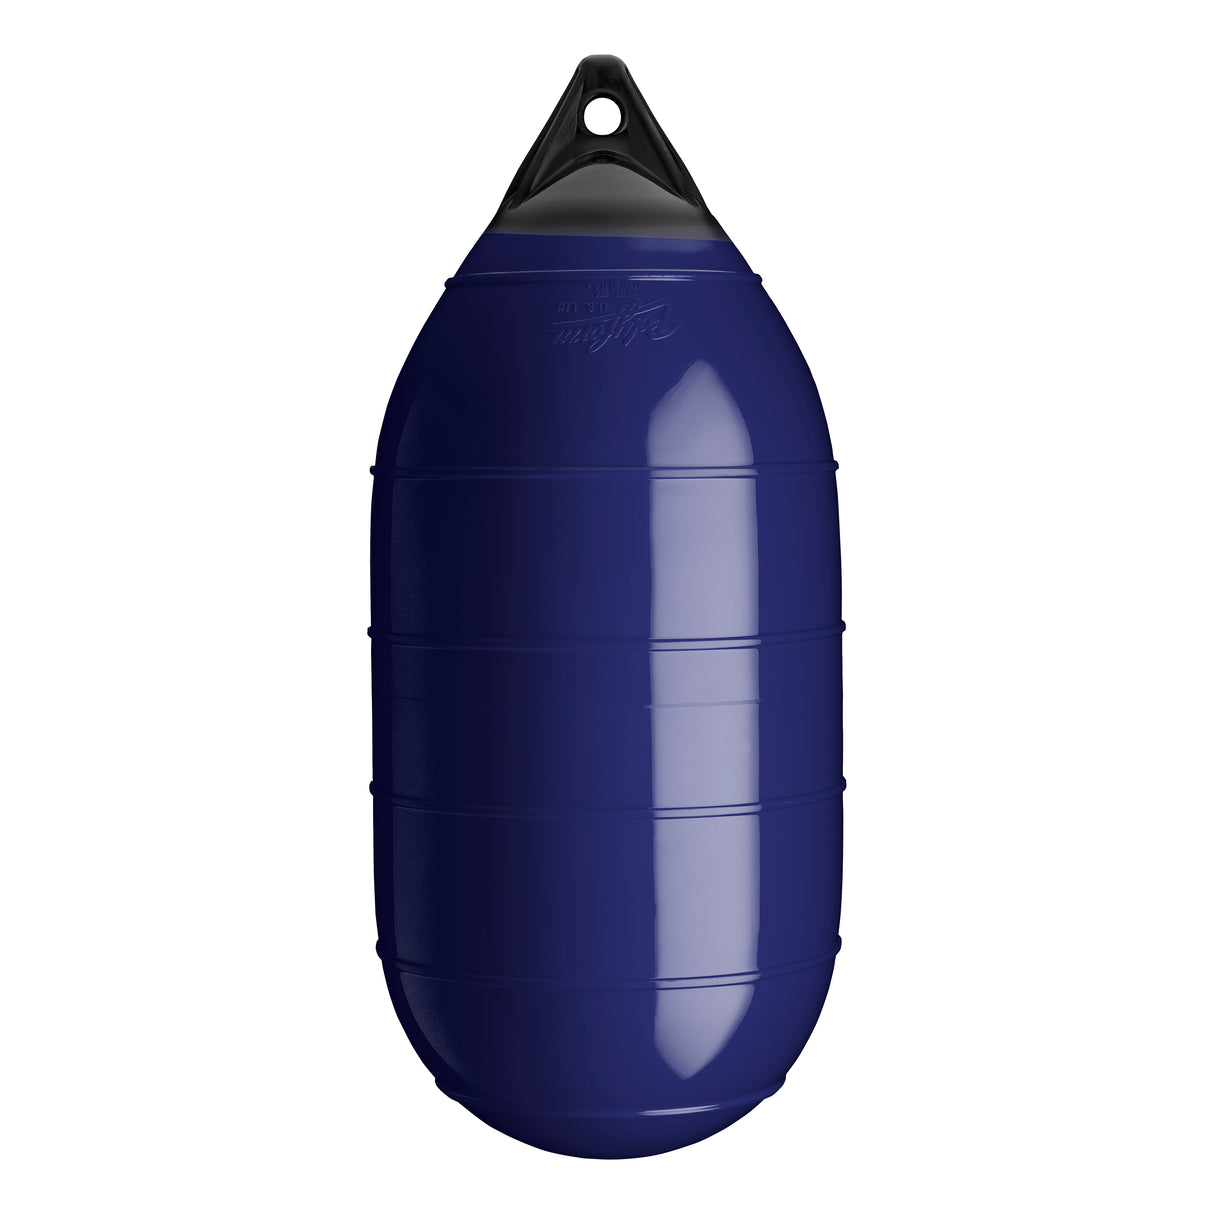 Navy Blue low drag buoy with Black-Top, Polyform LD-3 